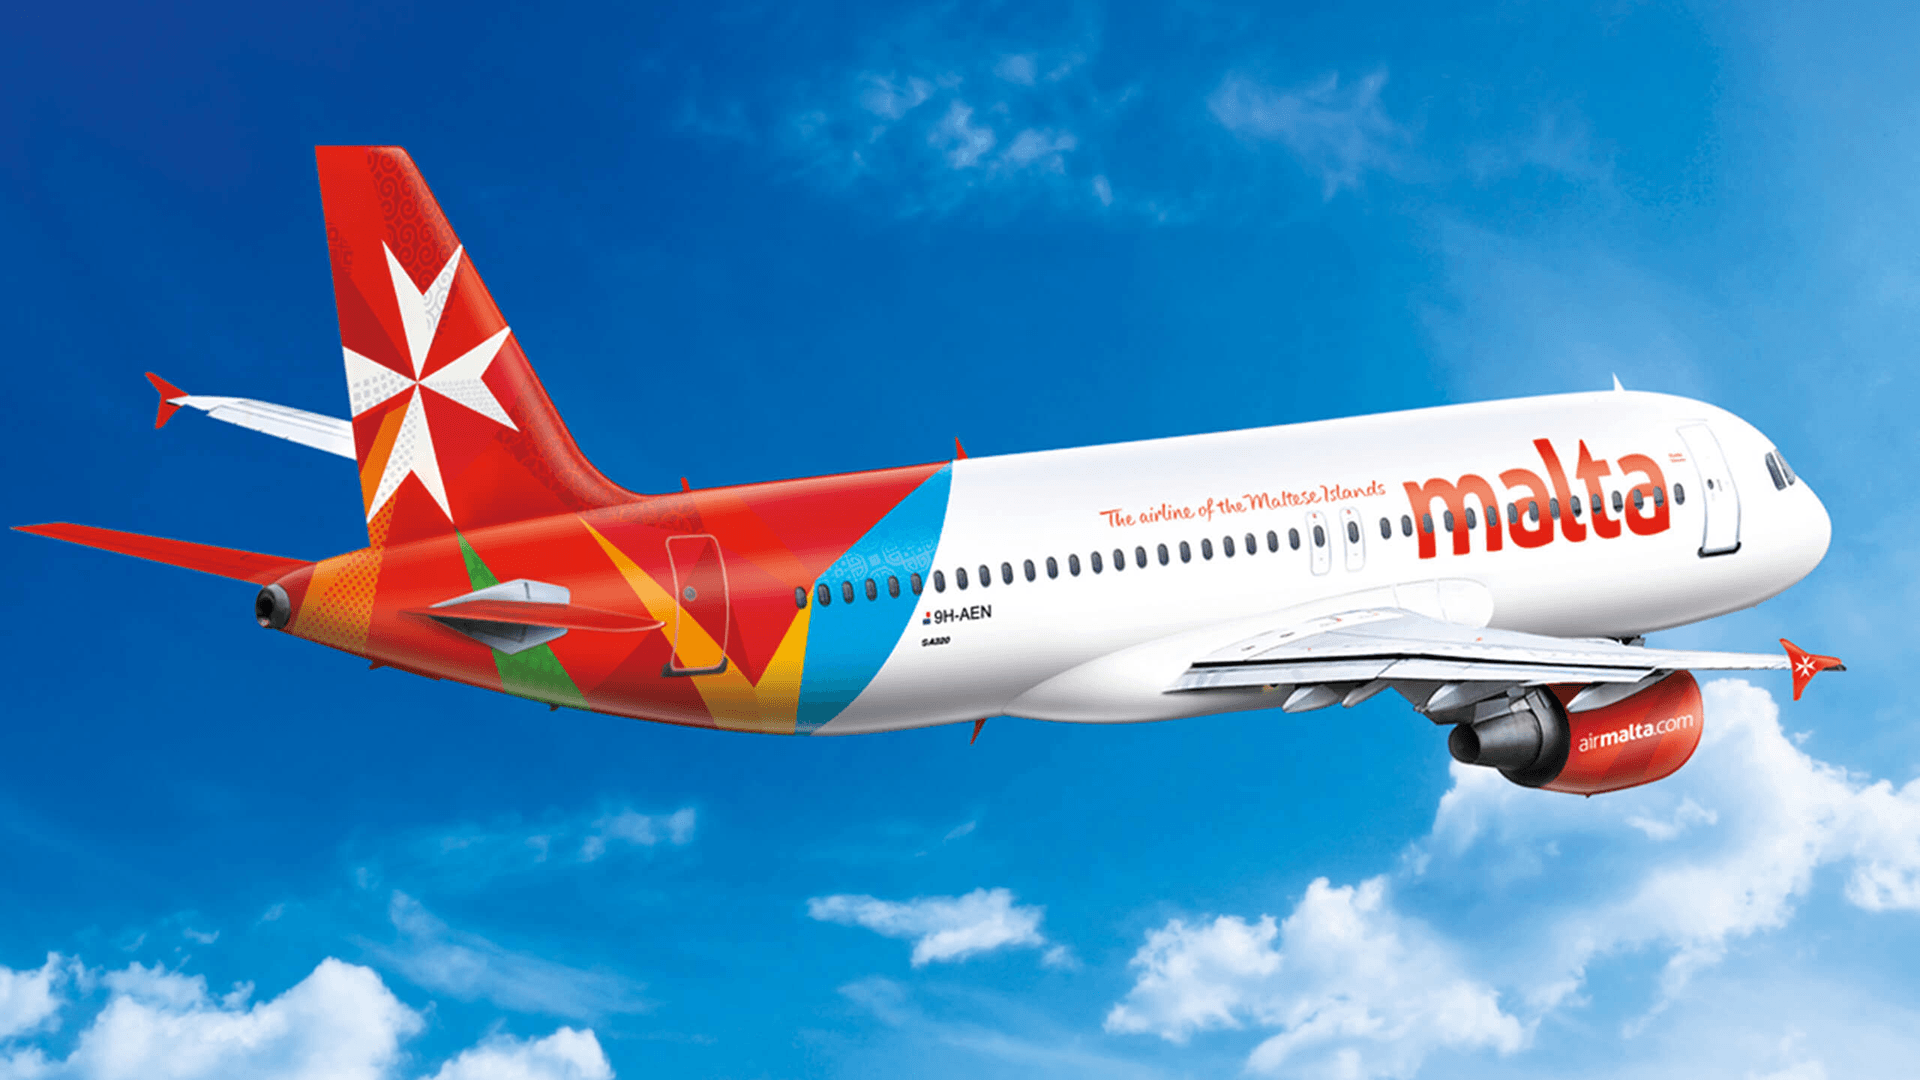 Air Malta Chairman’s Contract Under Wraps